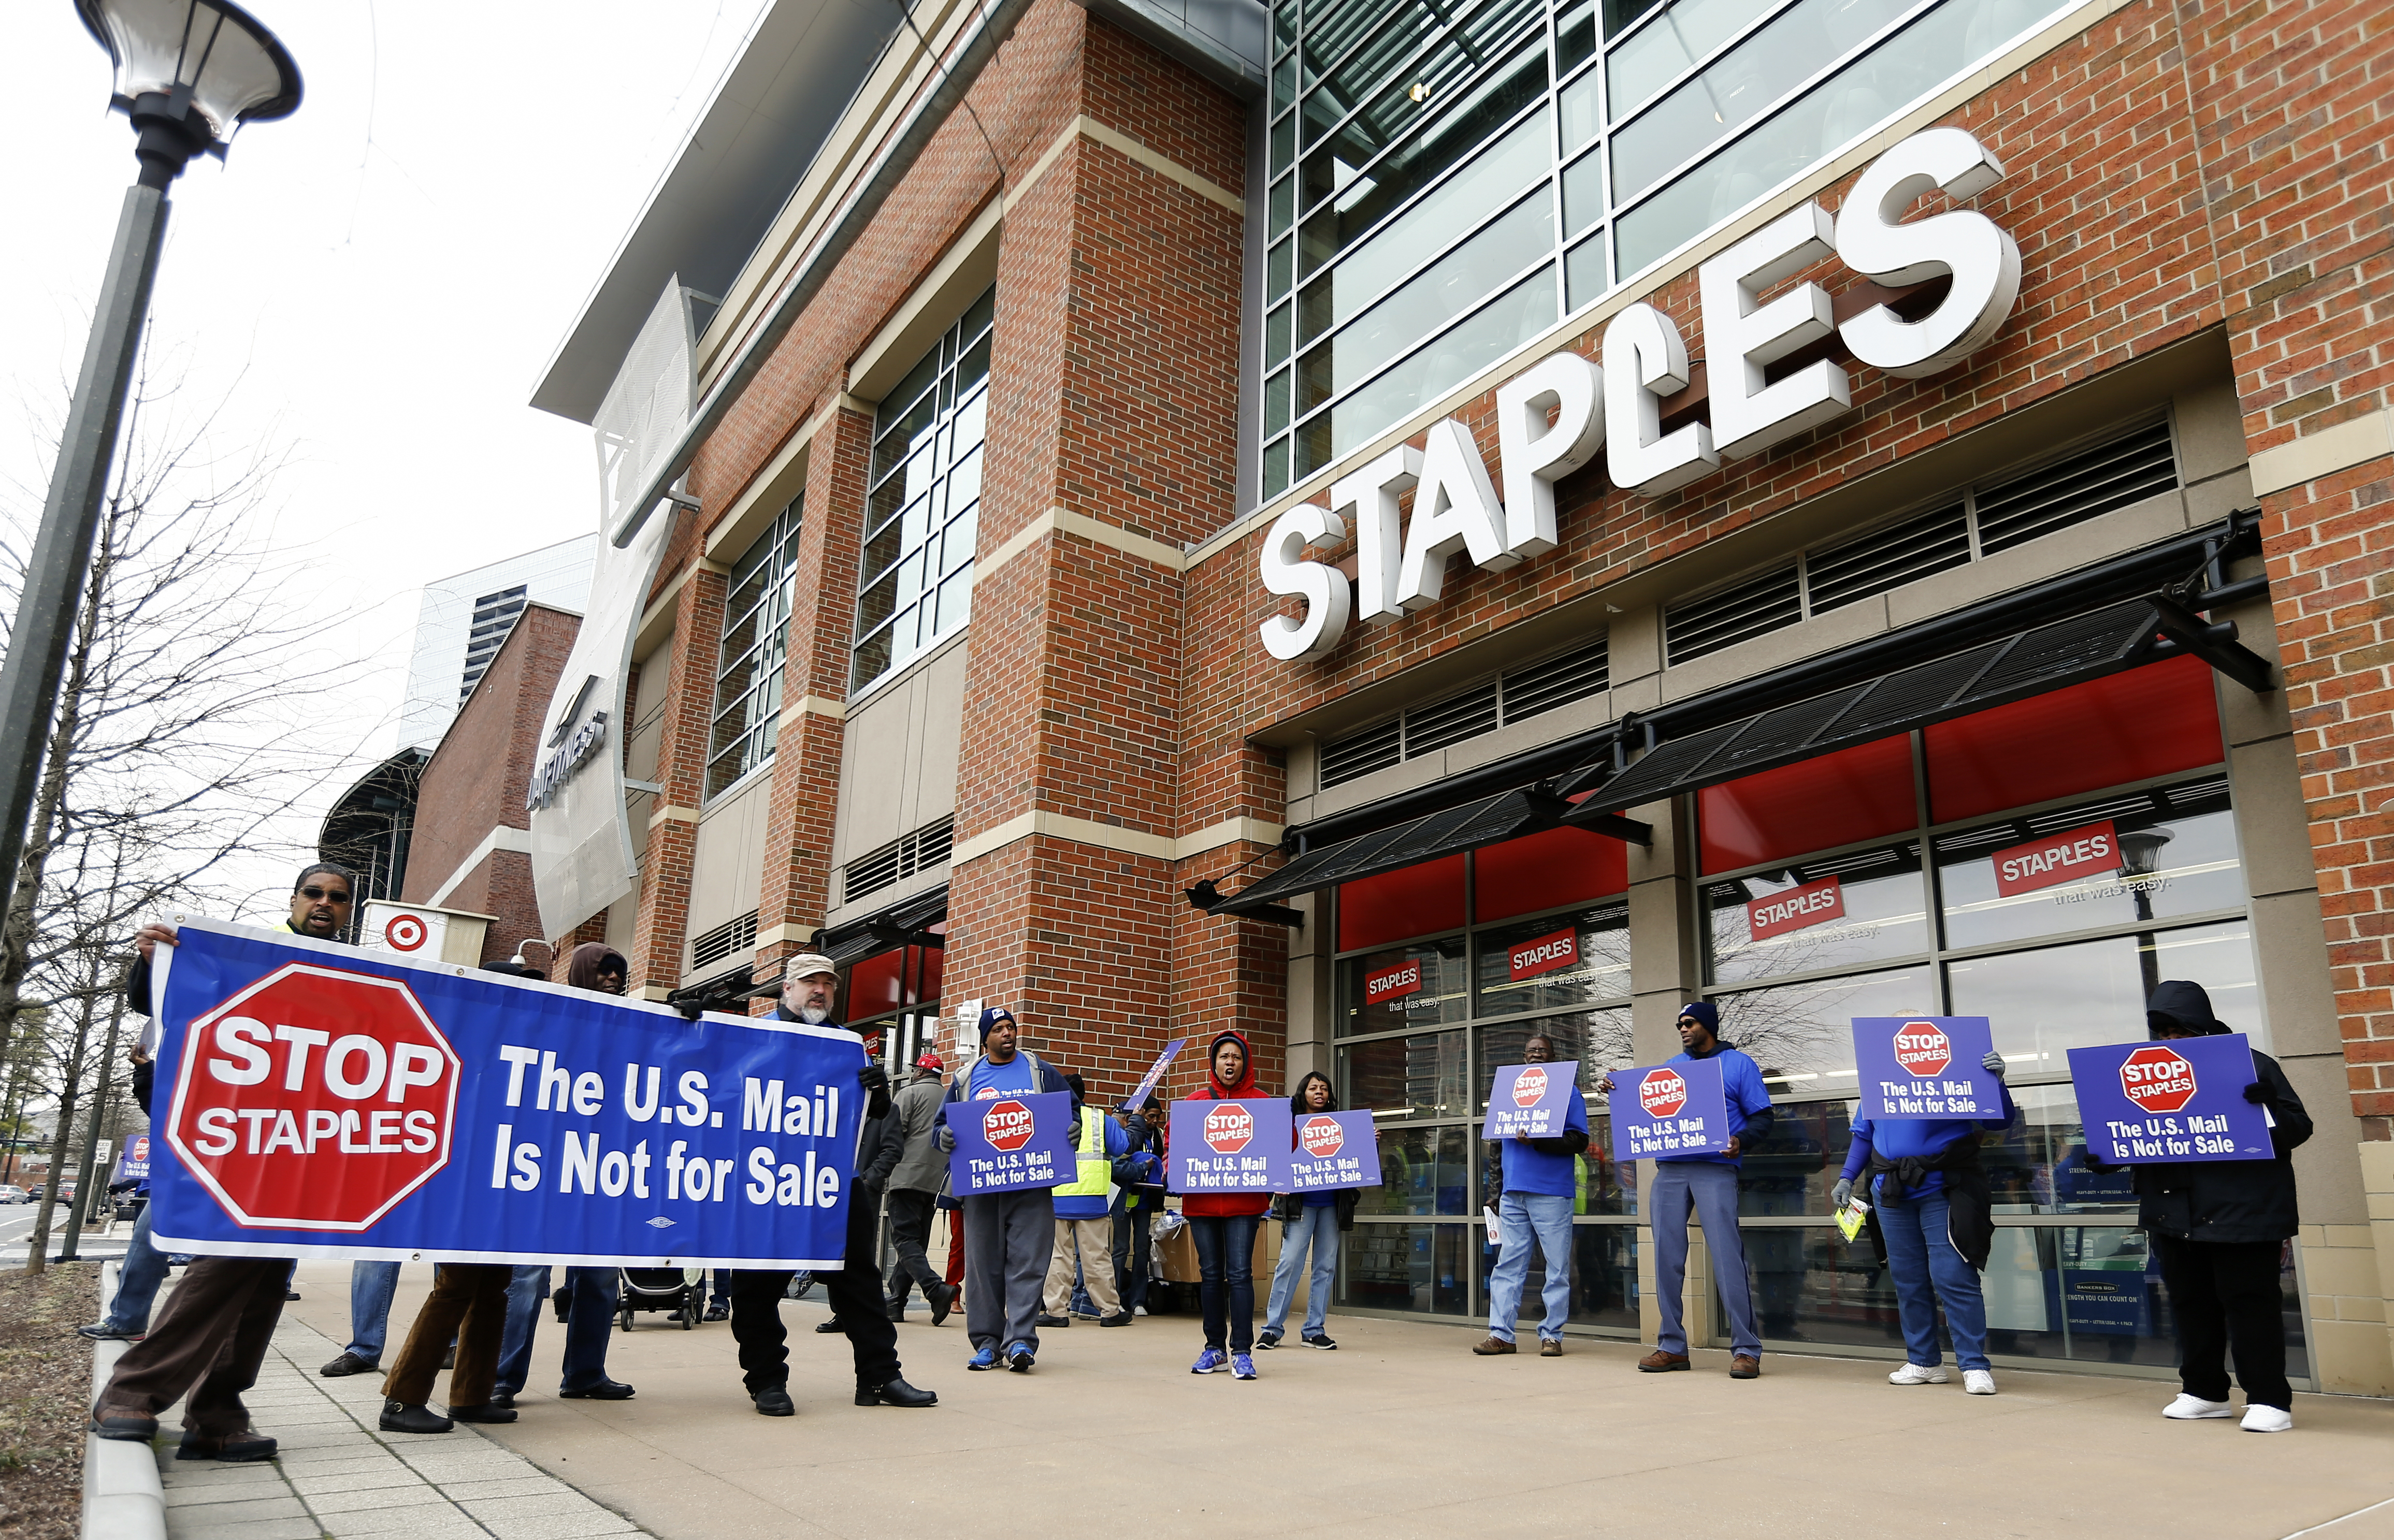 Staples To Close 225 Stores in North America